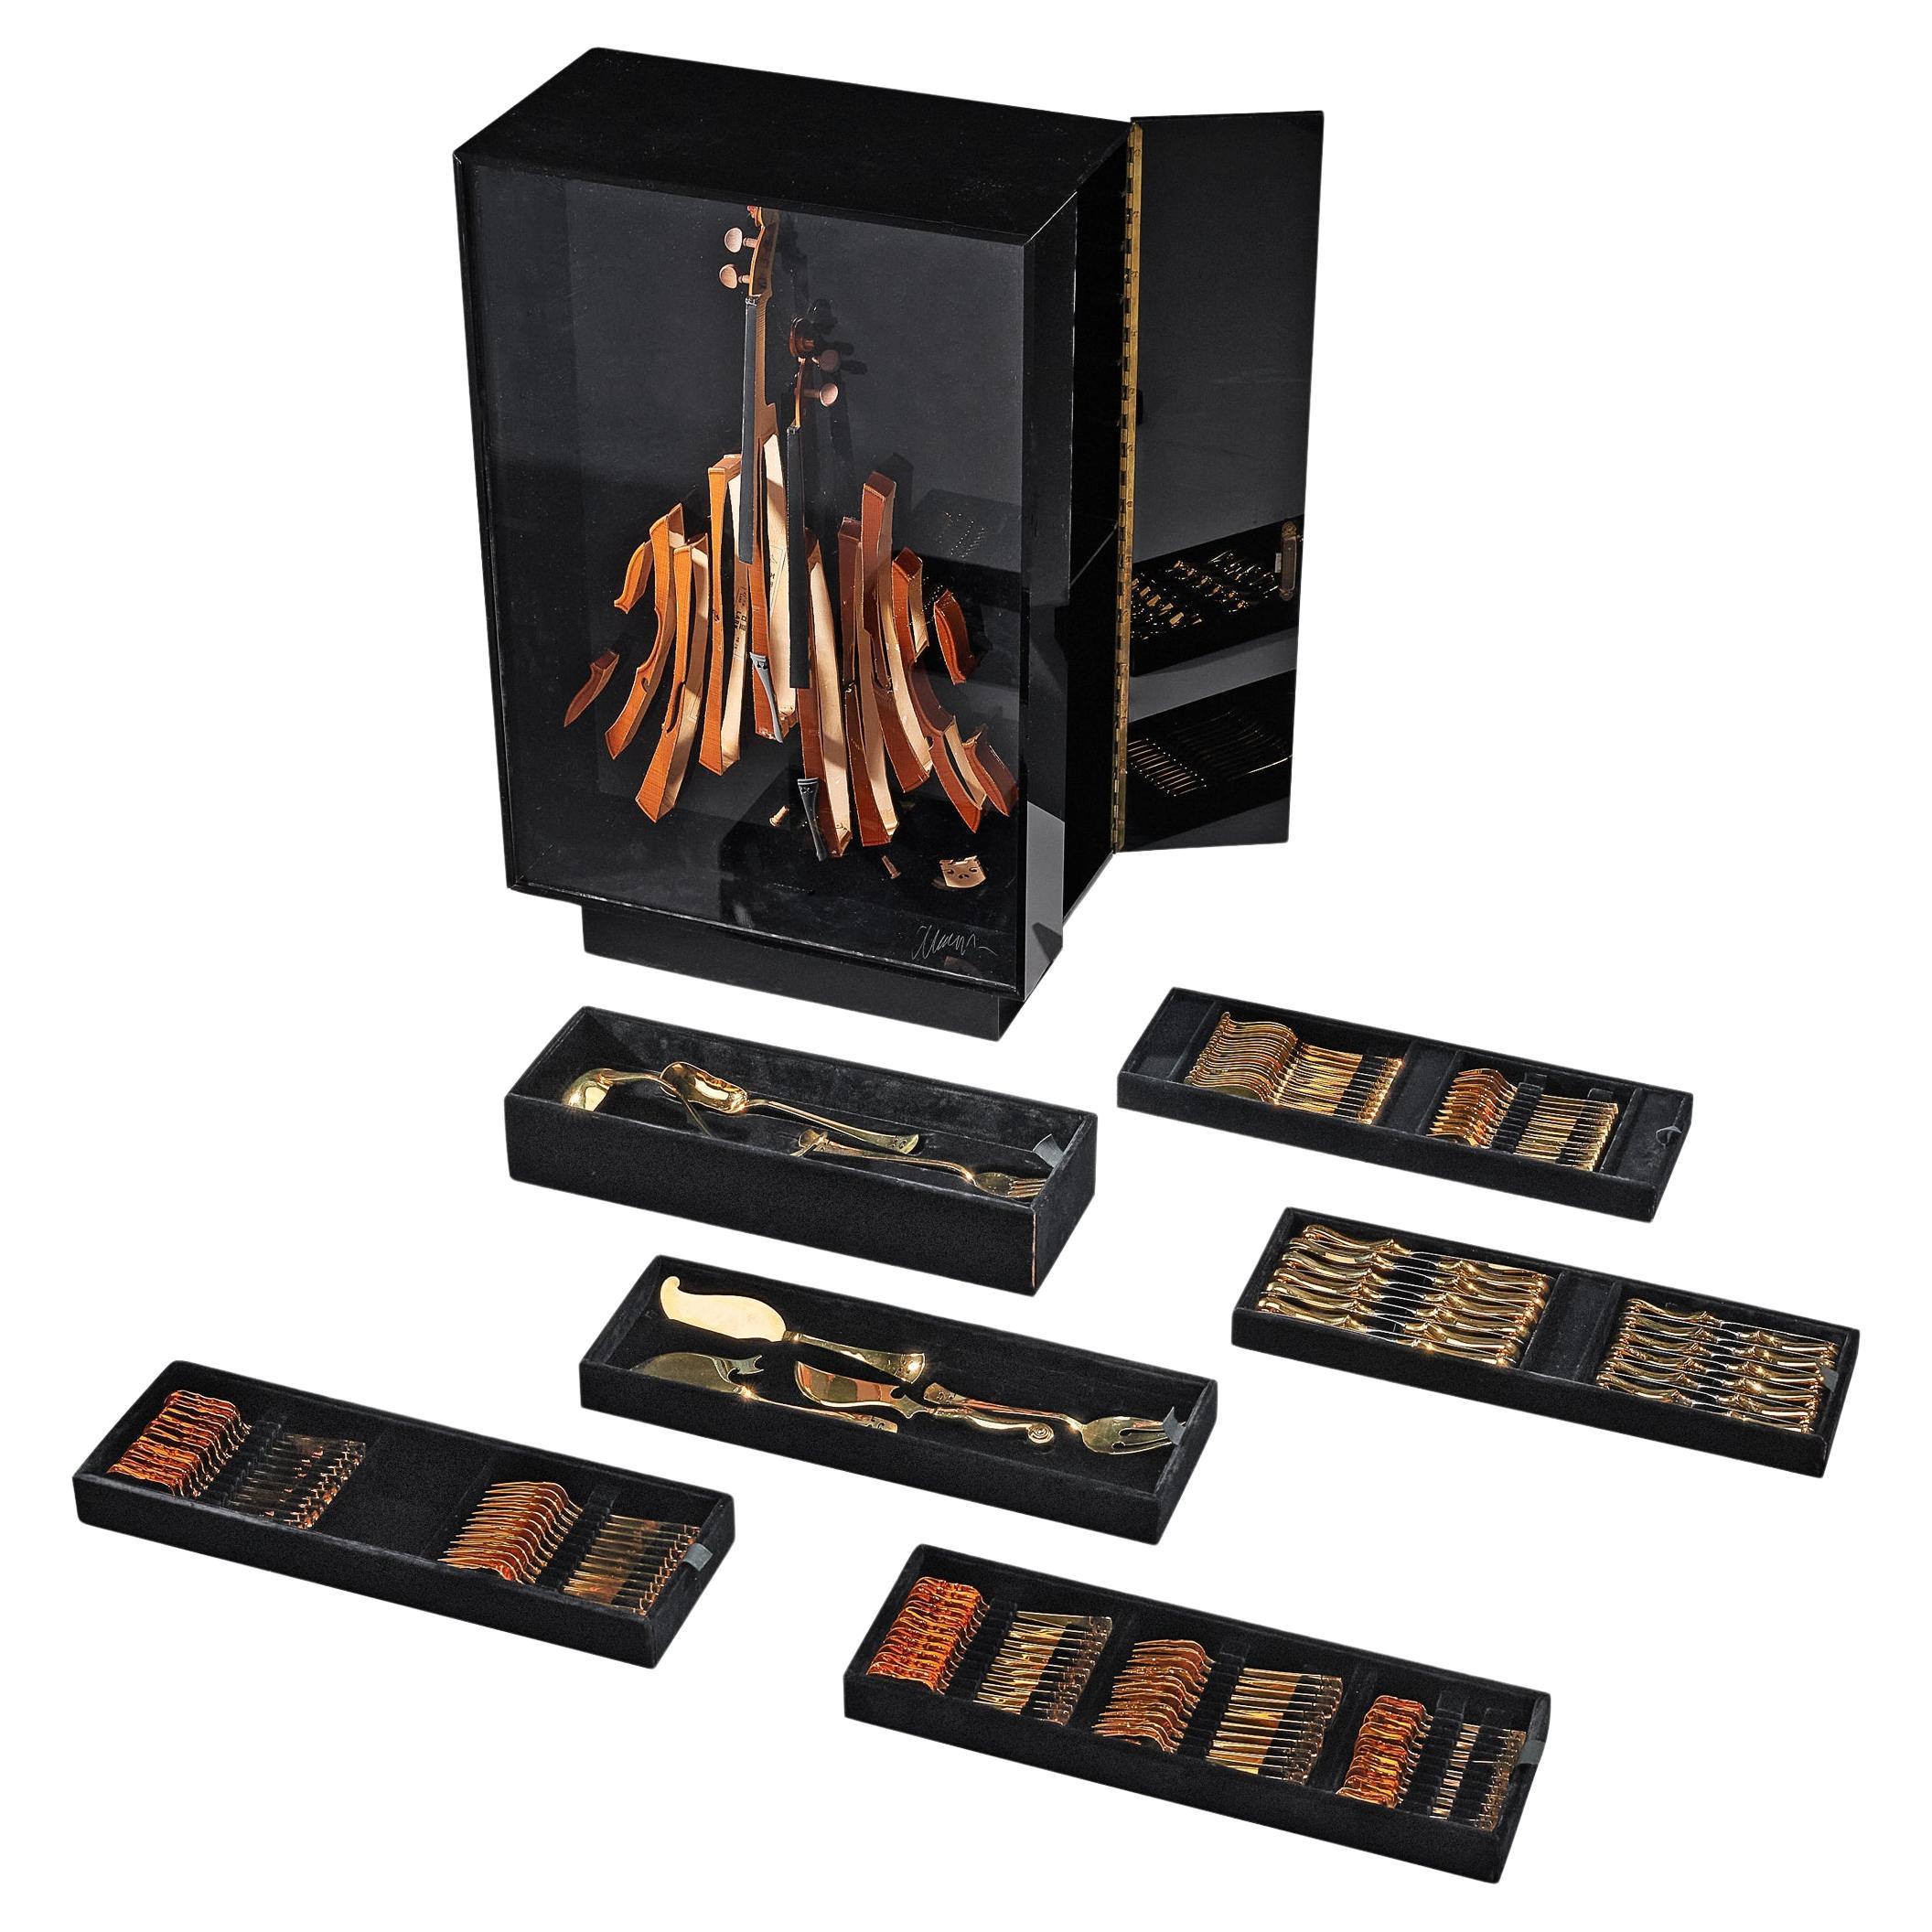 Arman ‘Violon’ Cutlery Service with 116 Pieces in Artistic Cabinet  For Sale